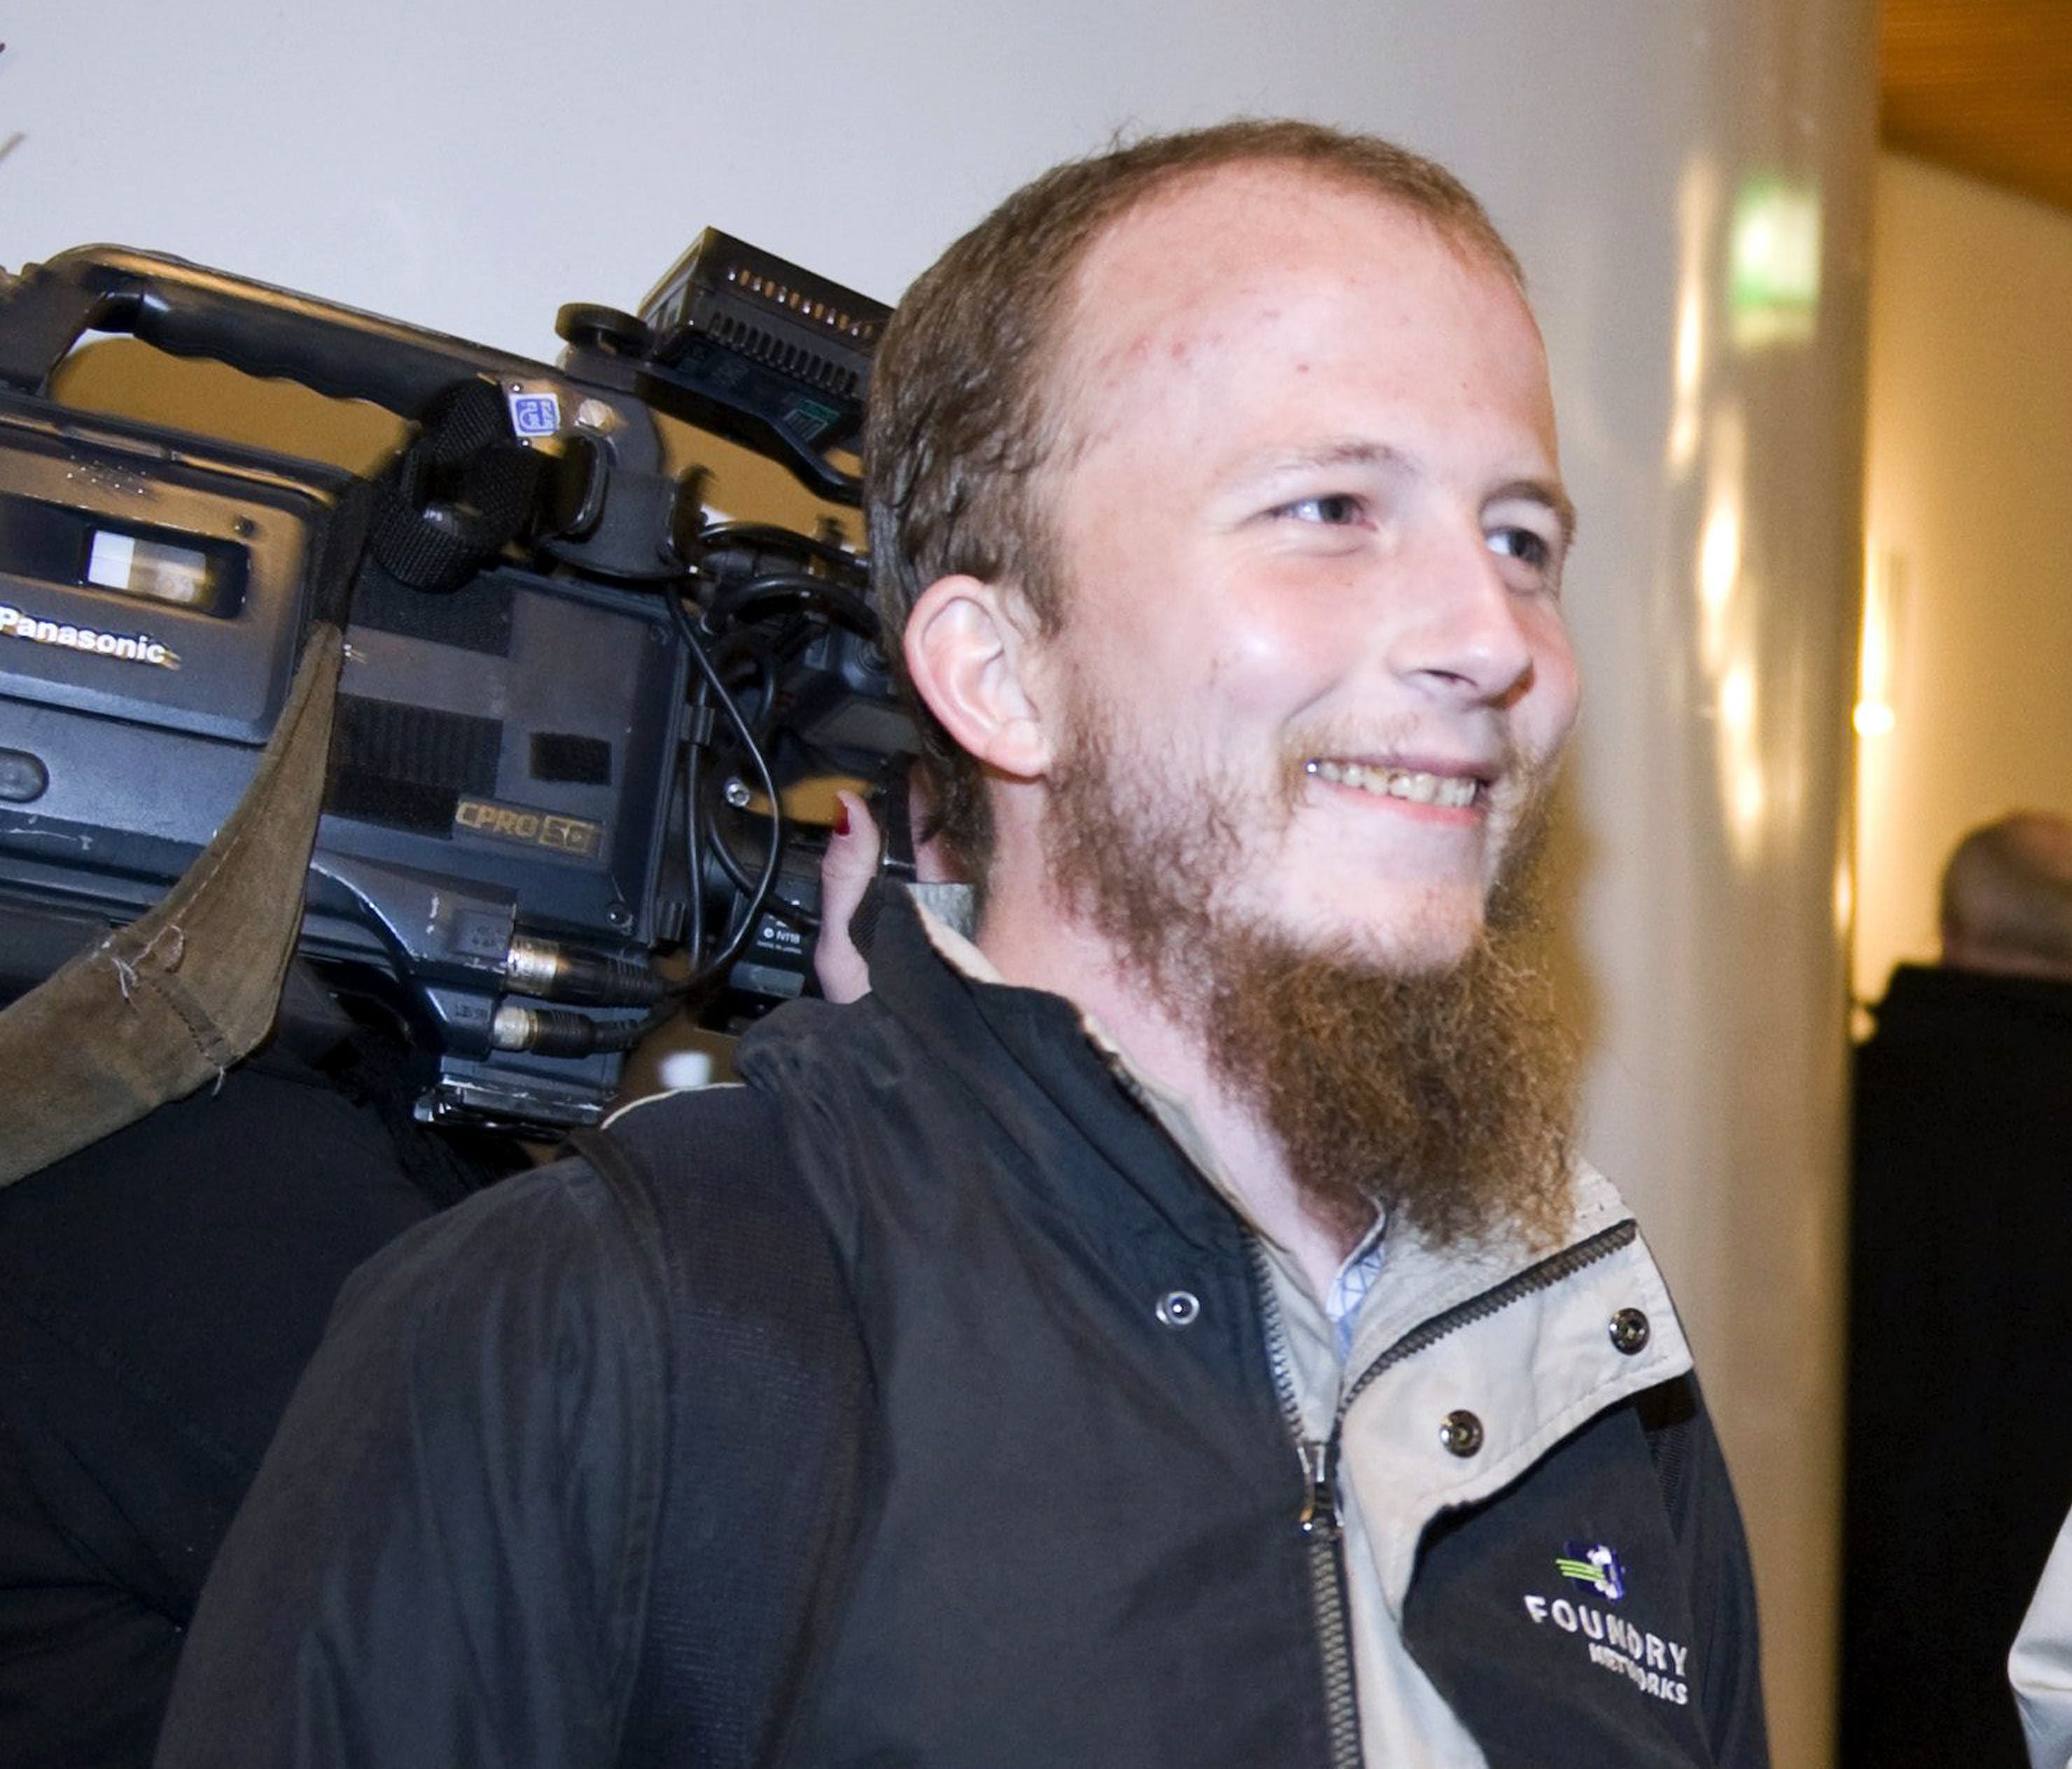 Pirate Bay founder charged with hacking